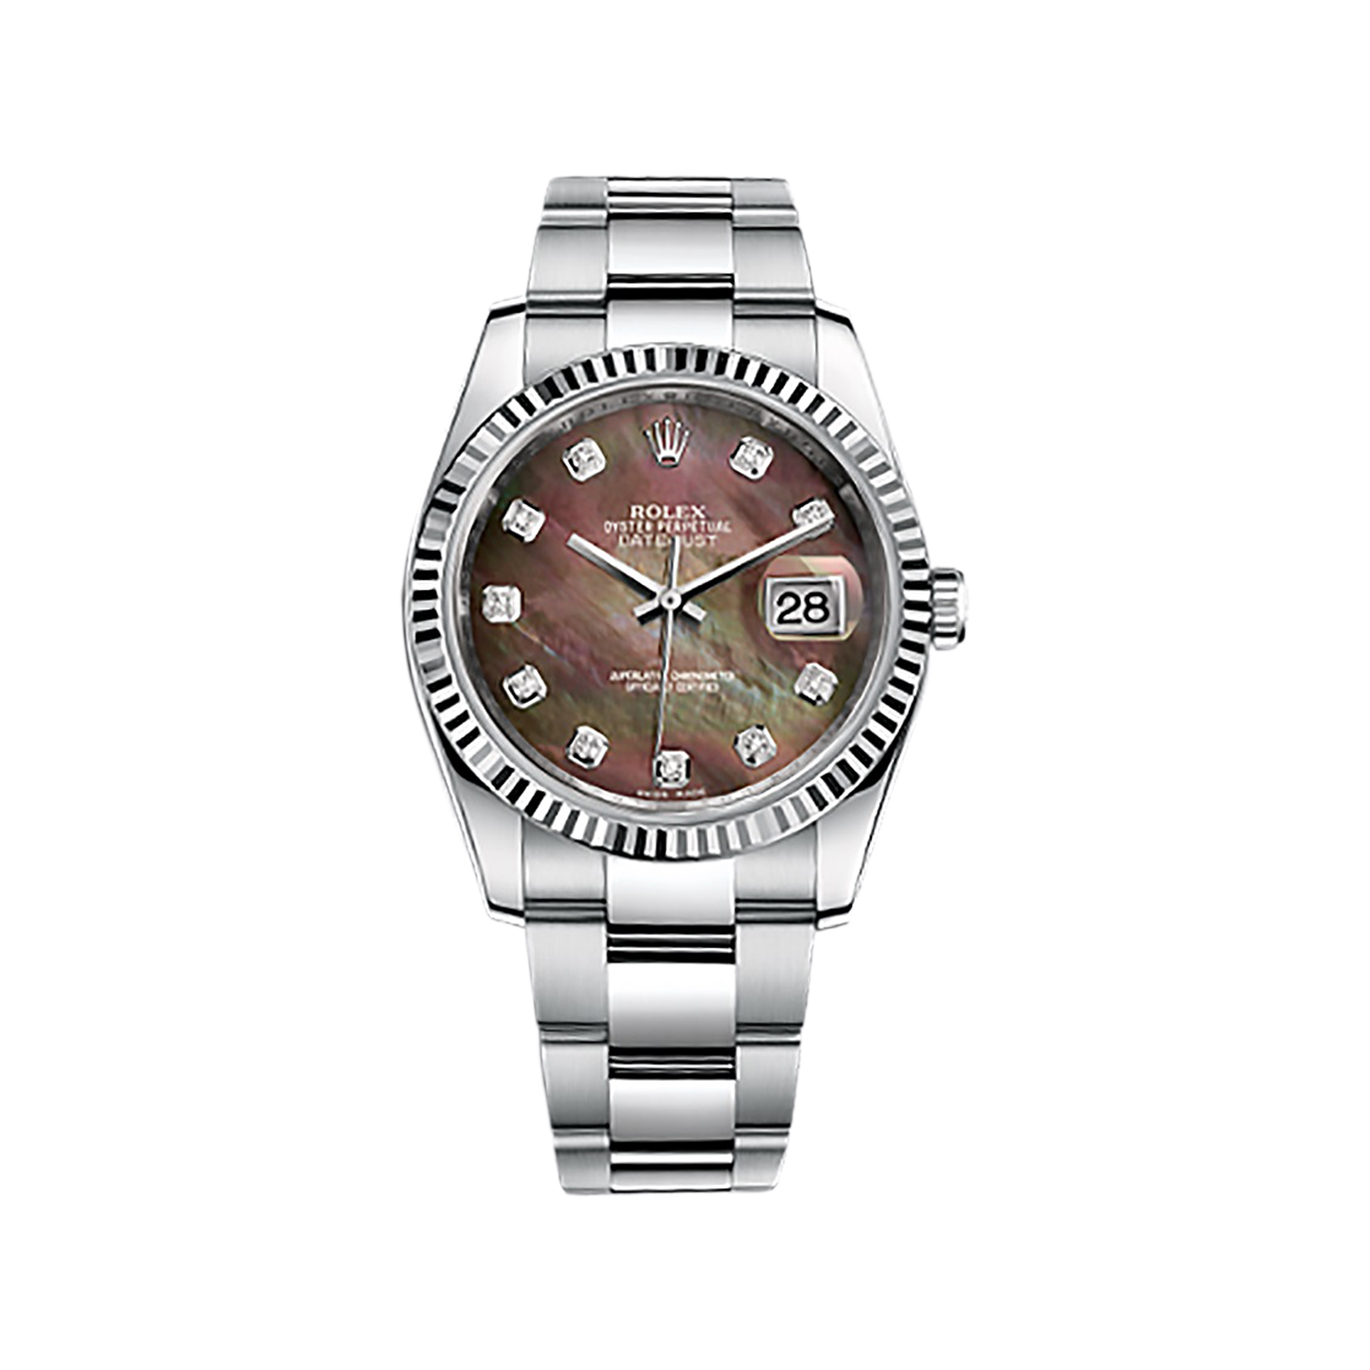 Datejust 36 116234 White Gold & Stainless Steel Watch (Black Mother-of-Pearl Set with Diamonds)